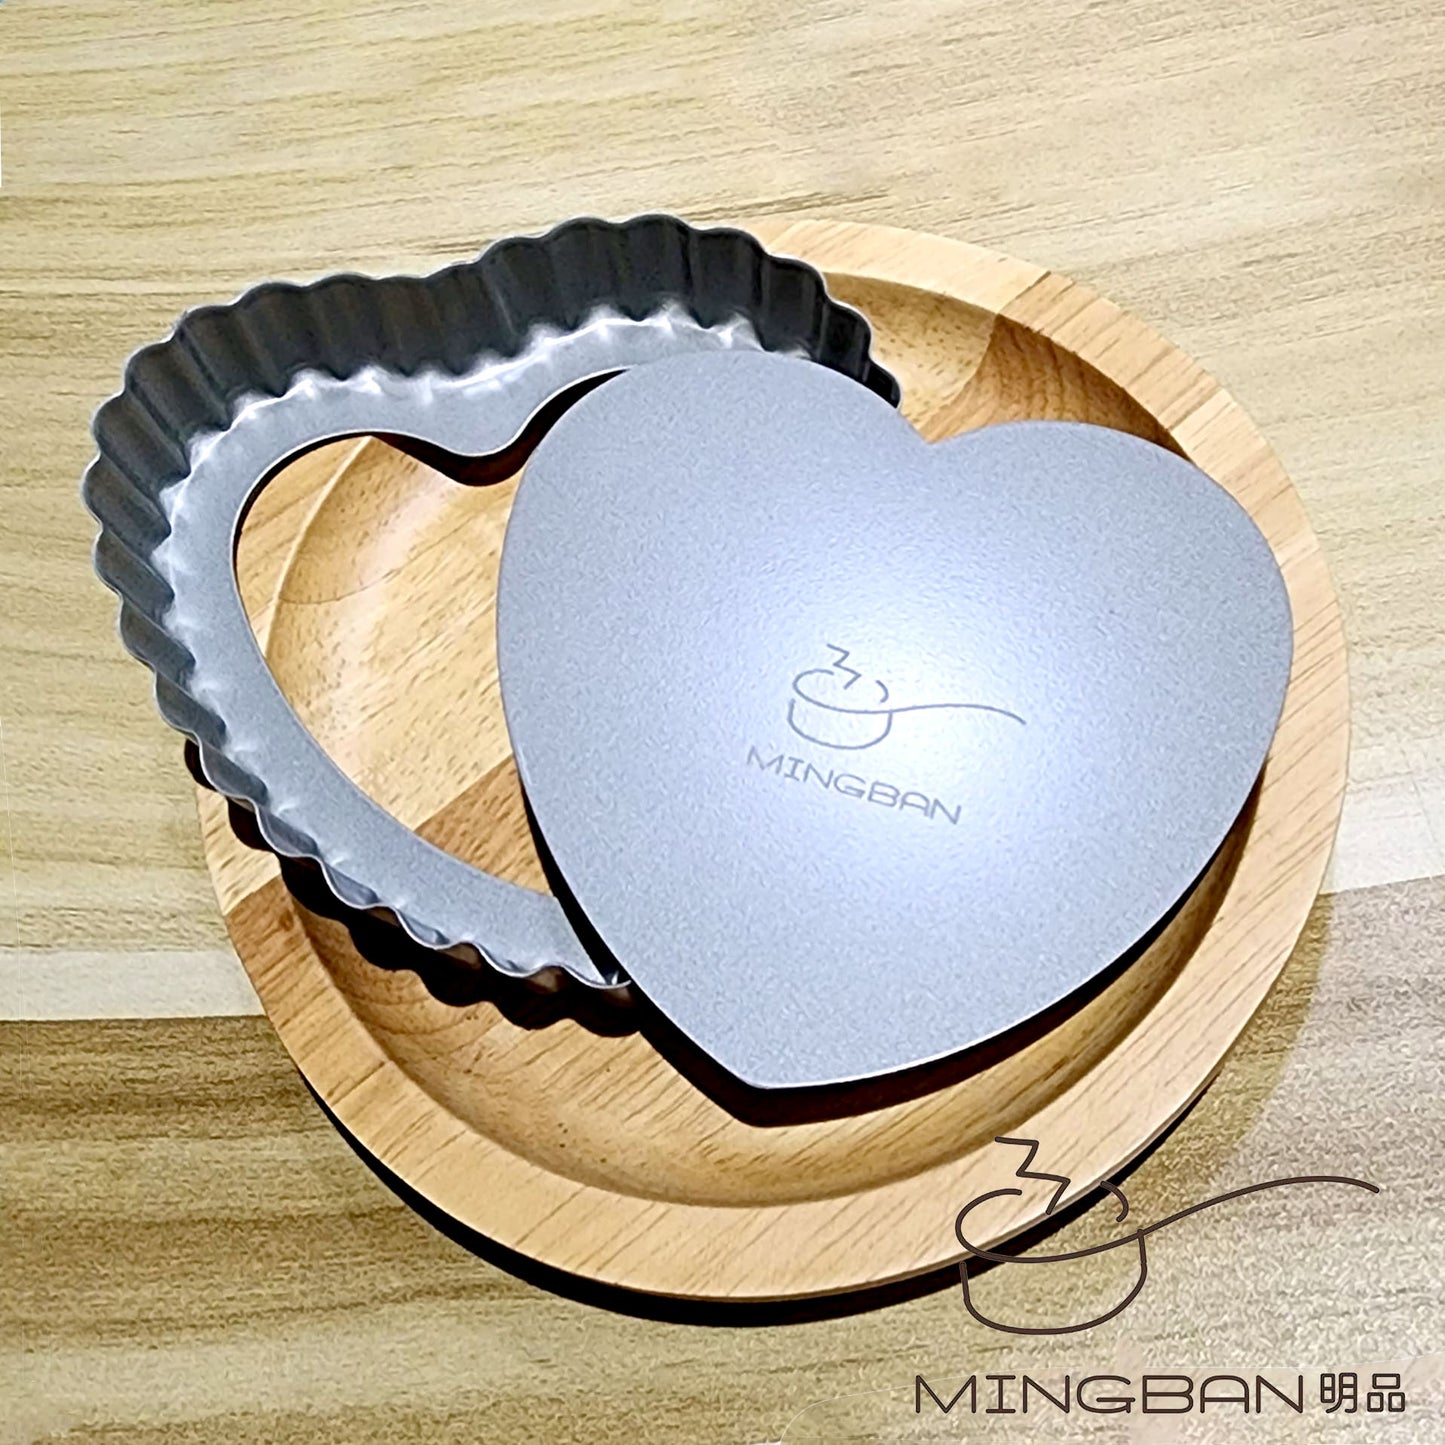 4" Heart Shaped Tart Mold Pie Pan (Carbon Steel / Removable Bottom) #Valentines Day